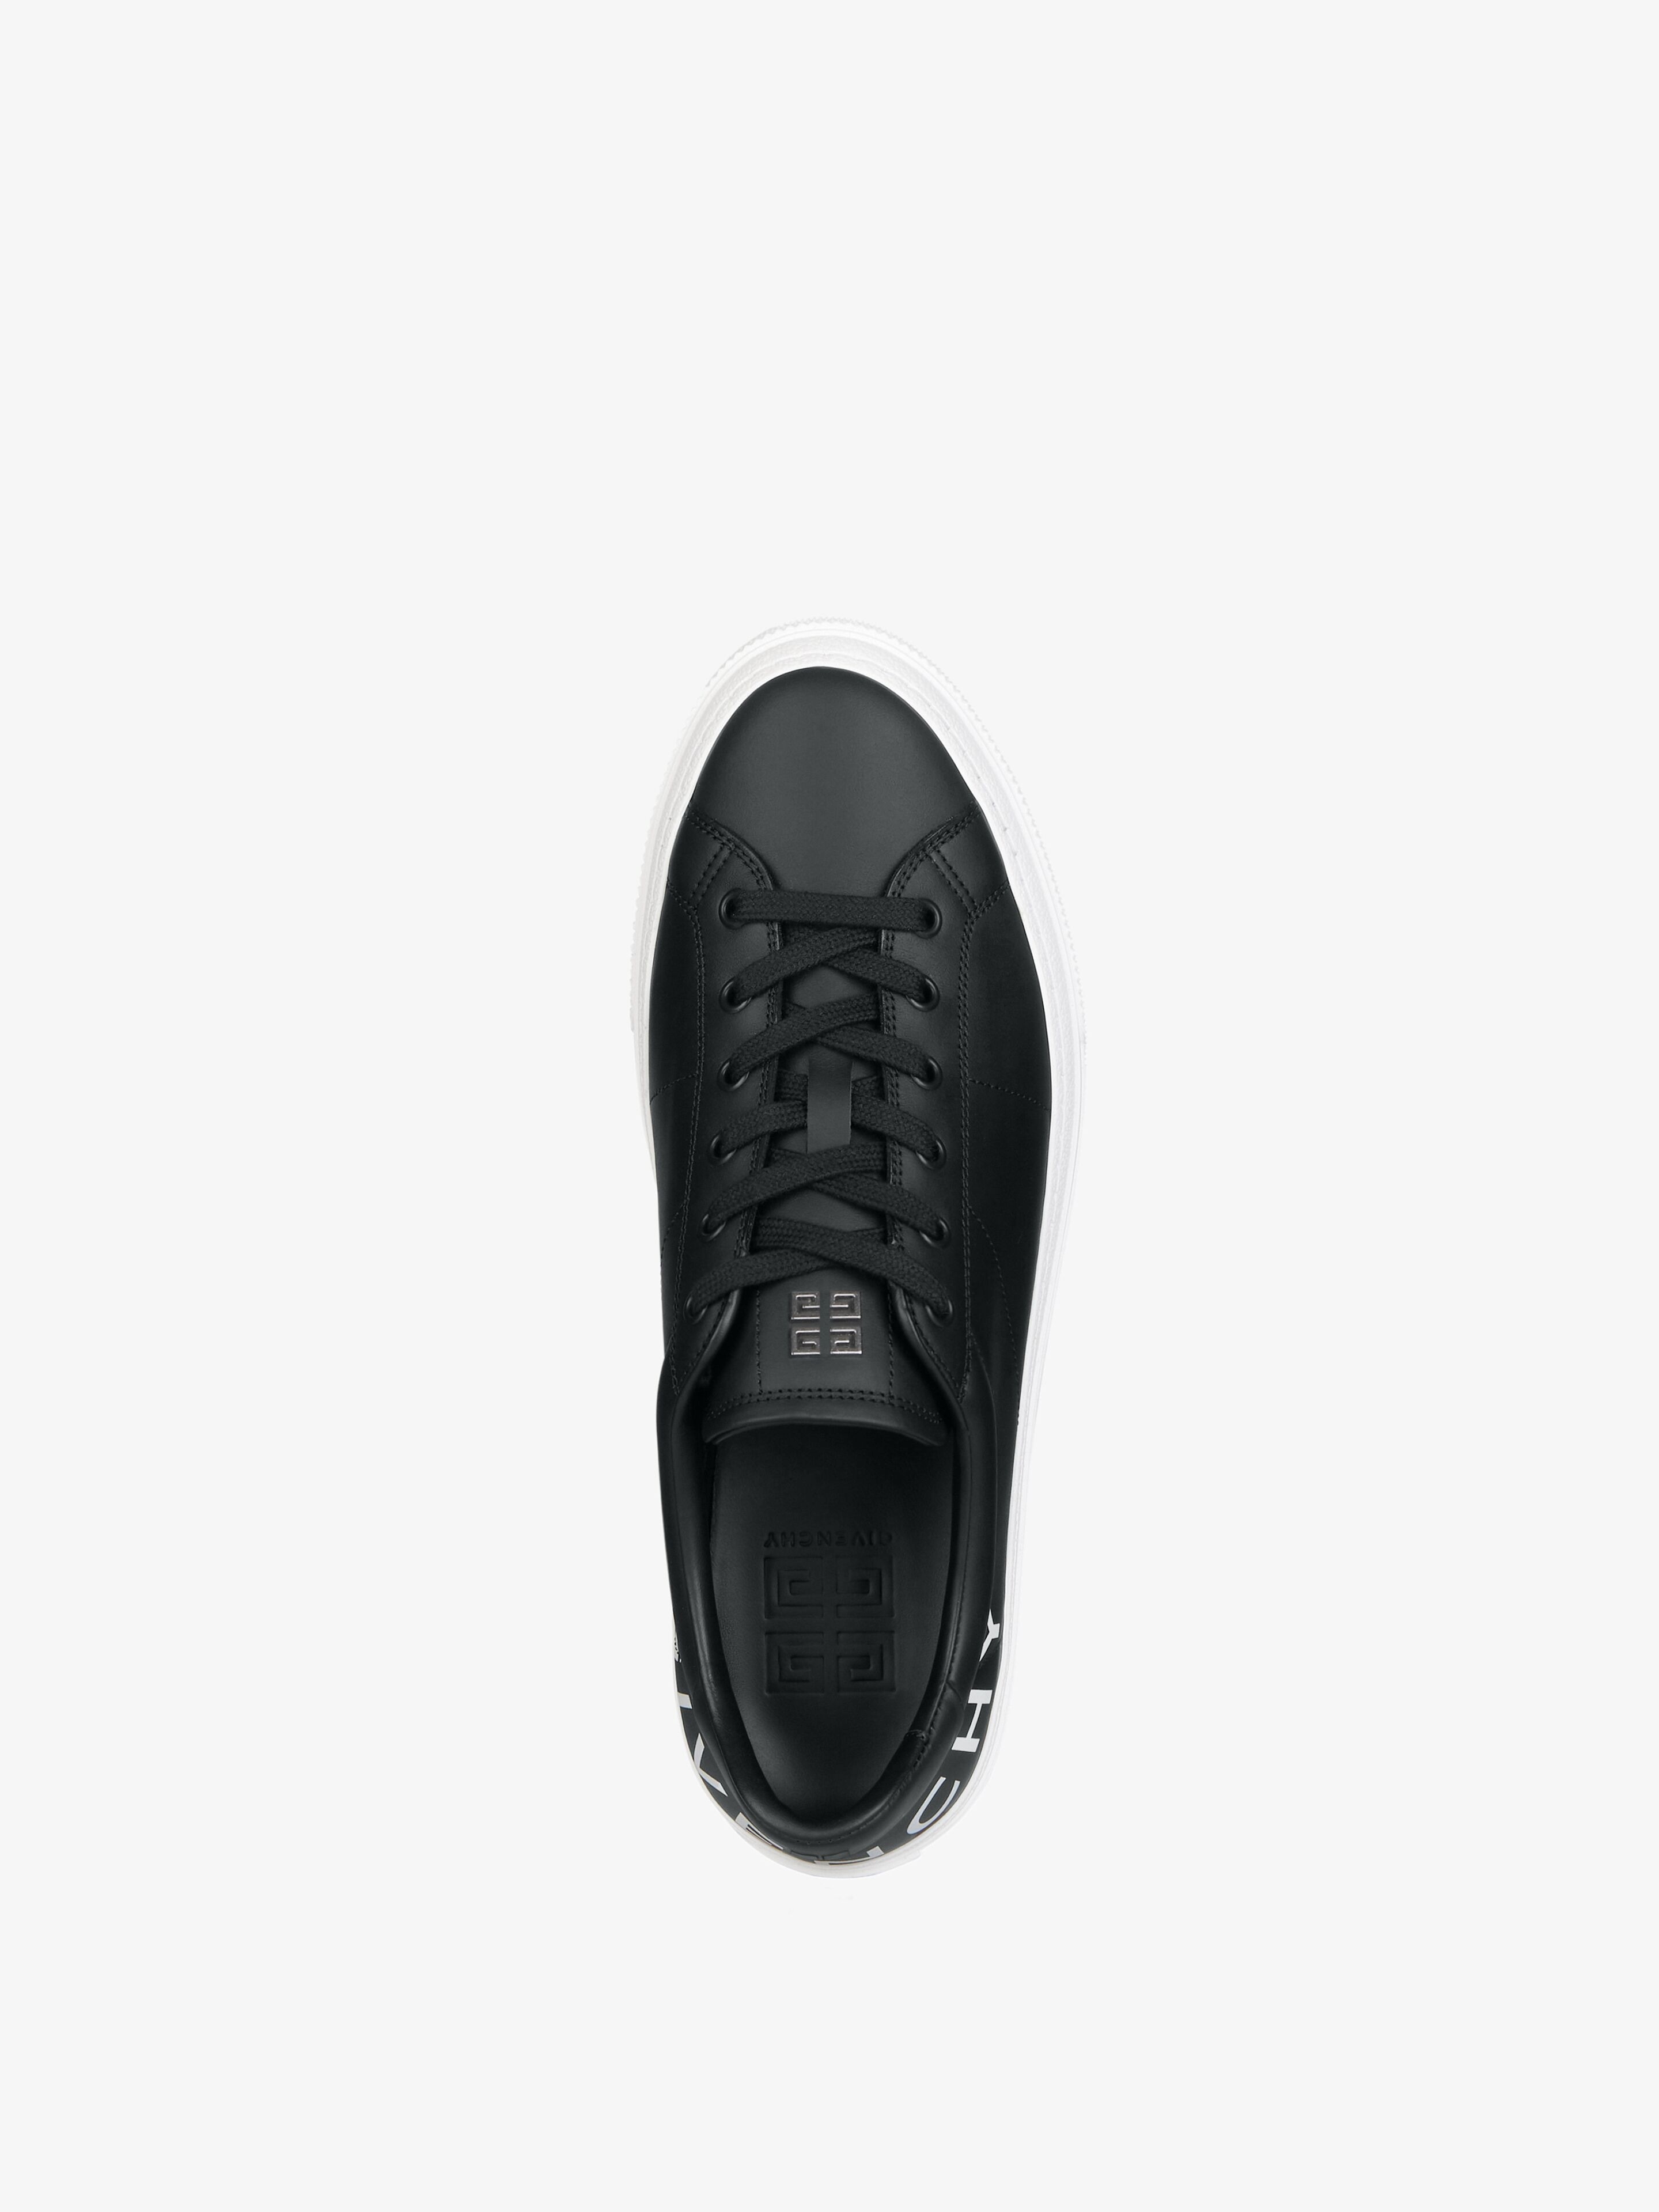 CITY SPORT SNEAKERS IN LEATHER WITH PRINTED GIVENCHY LOGO - 4